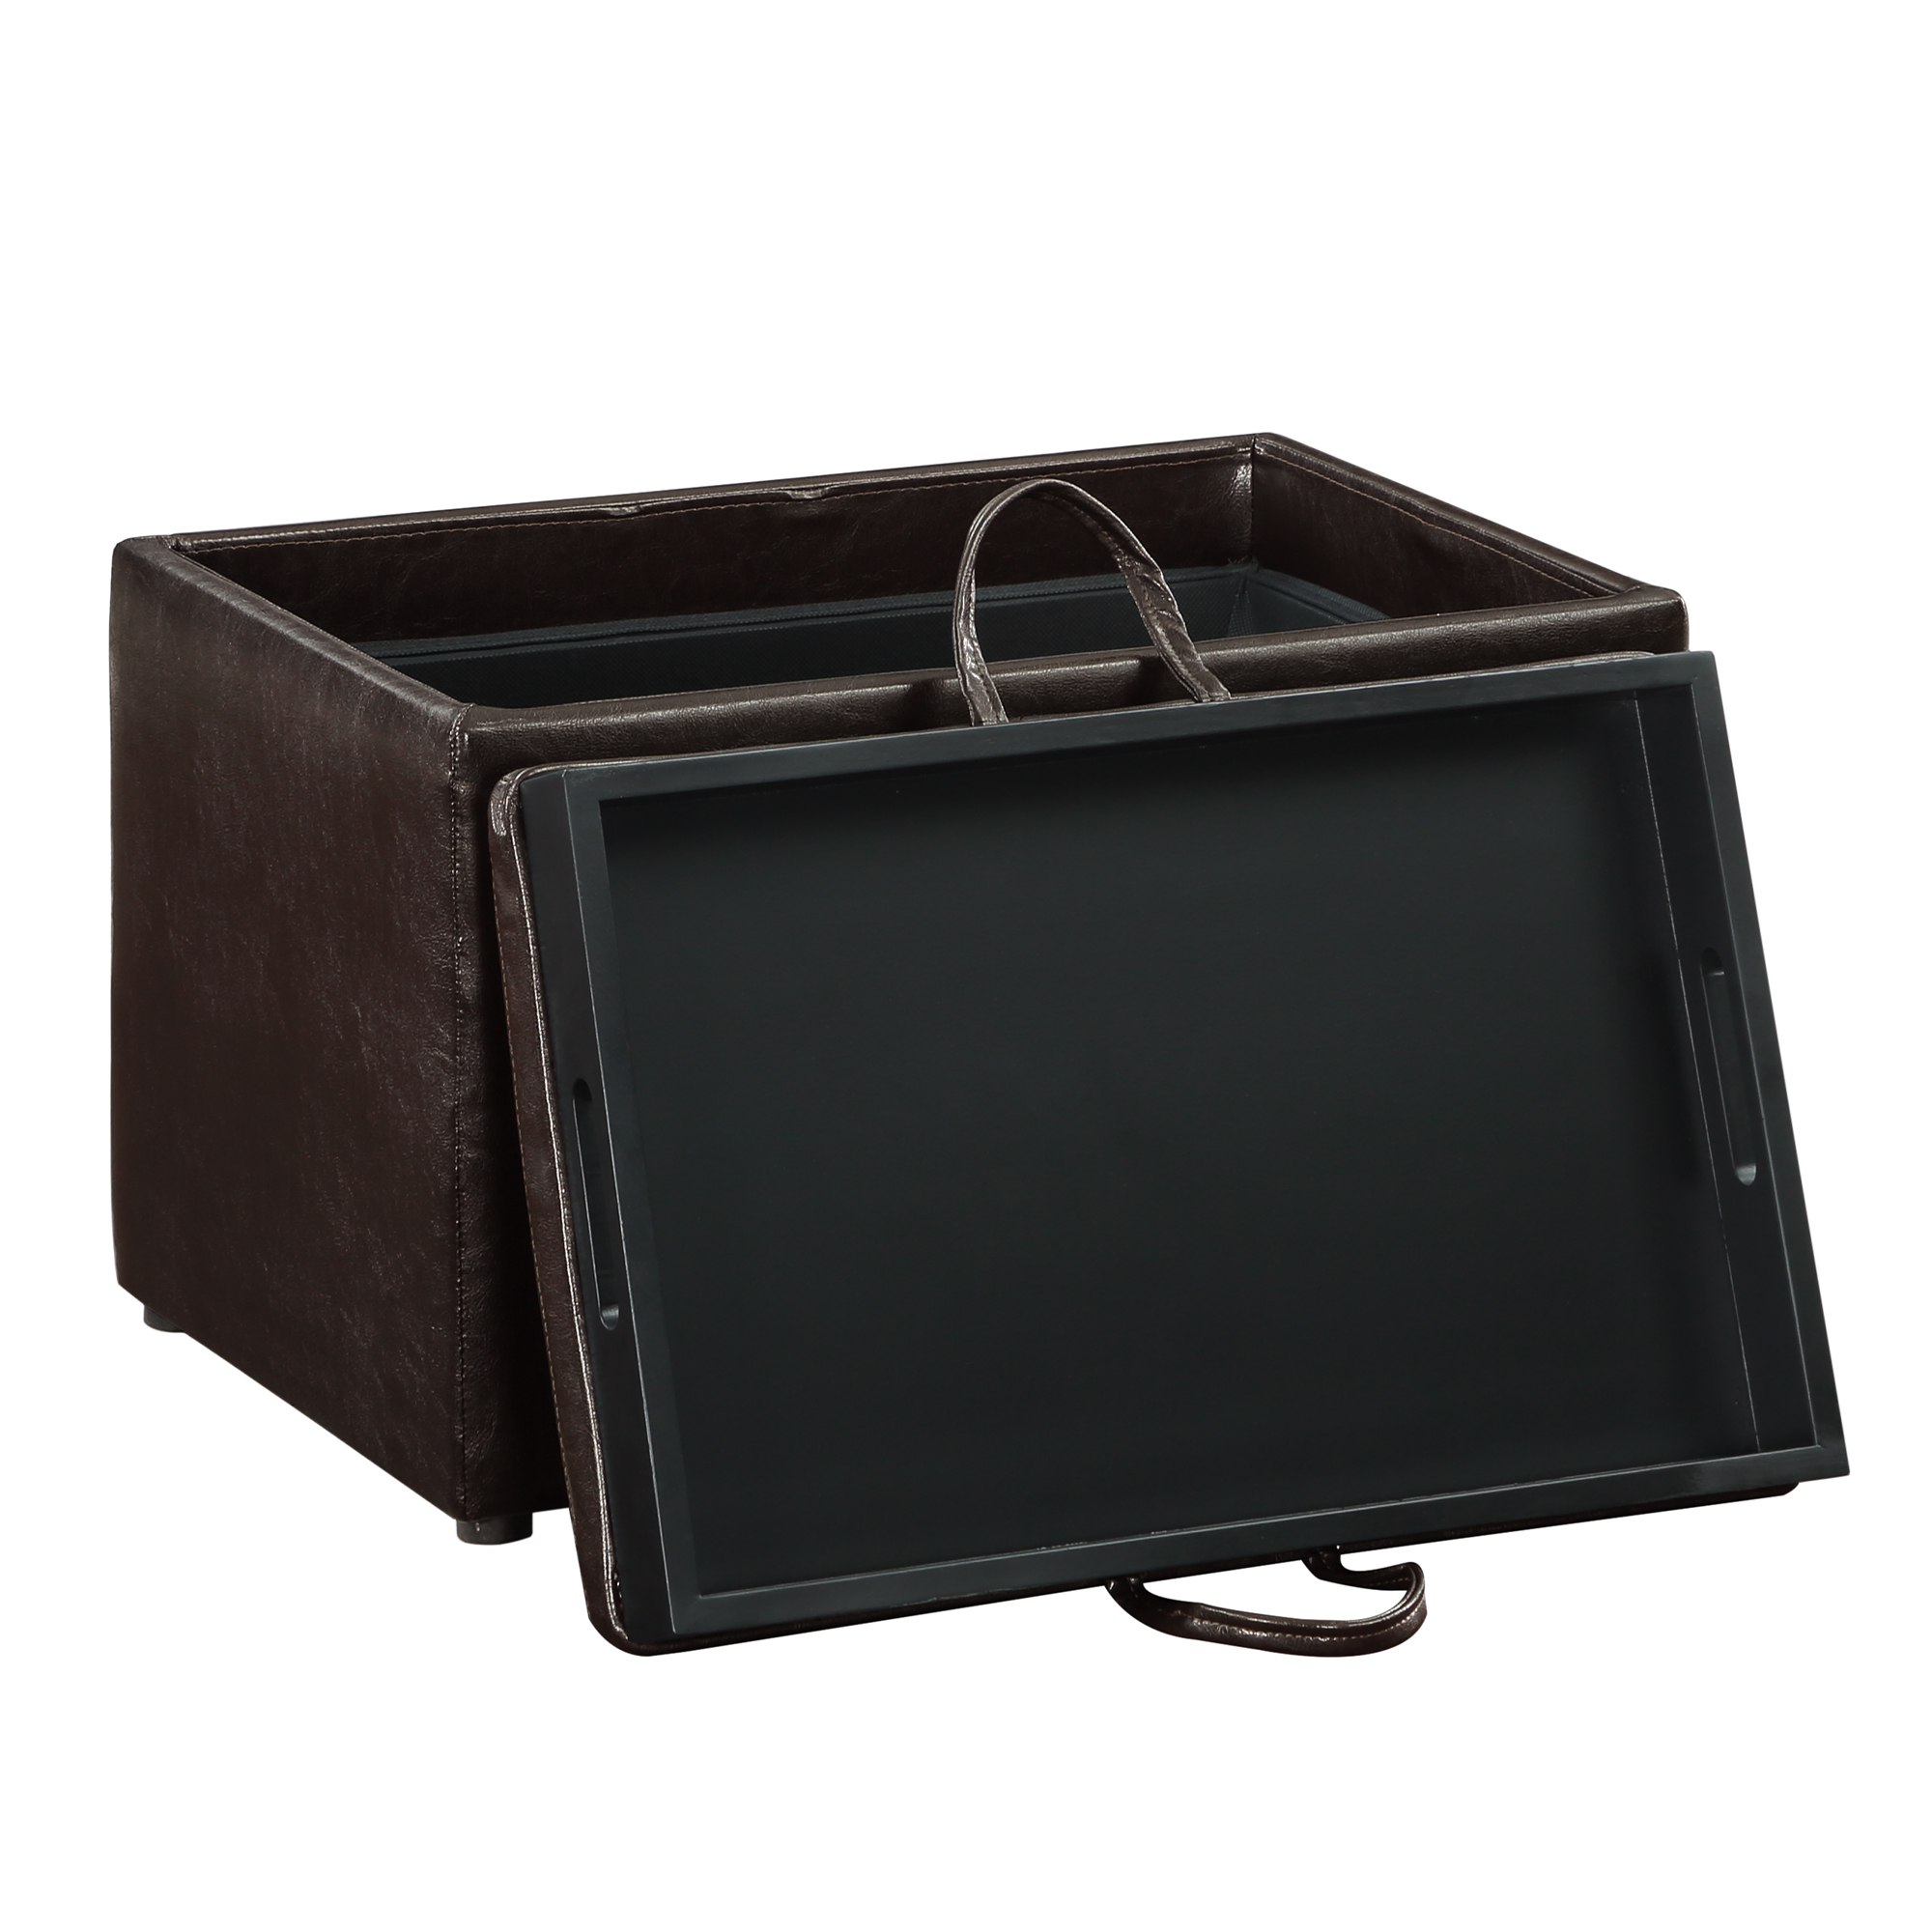 Convenience Concepts Designs4Comfort Accent Storage Ottoman with Reversible Tray, Espresso Faux Leather - image 3 of 8